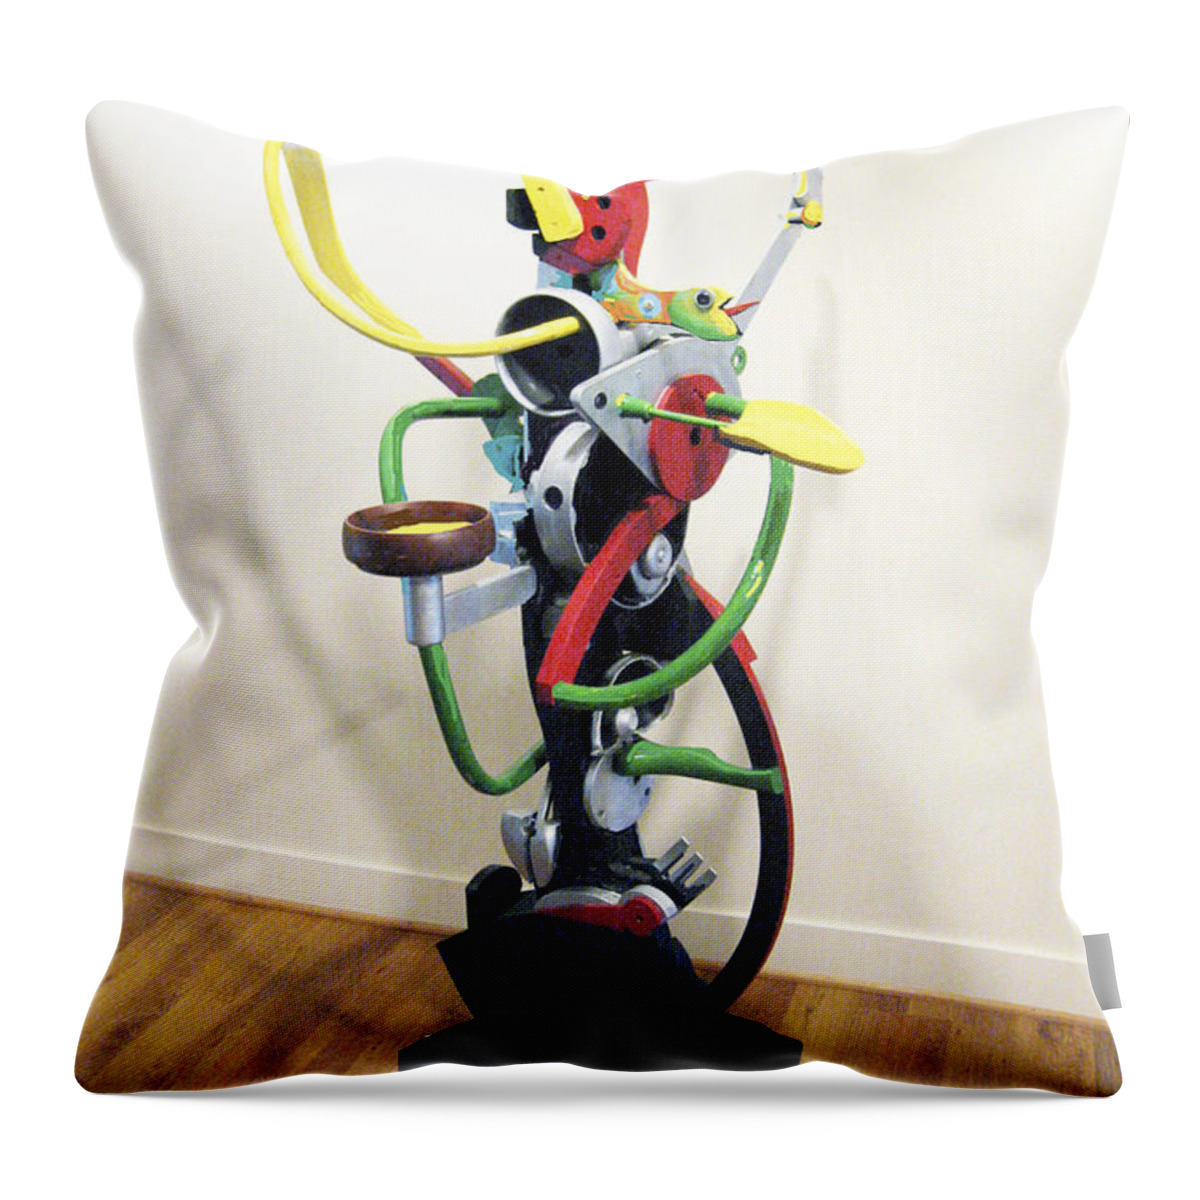 Recycled Objects Throw Pillow featuring the photograph Wood Sculpture #3 by Bill Thomson